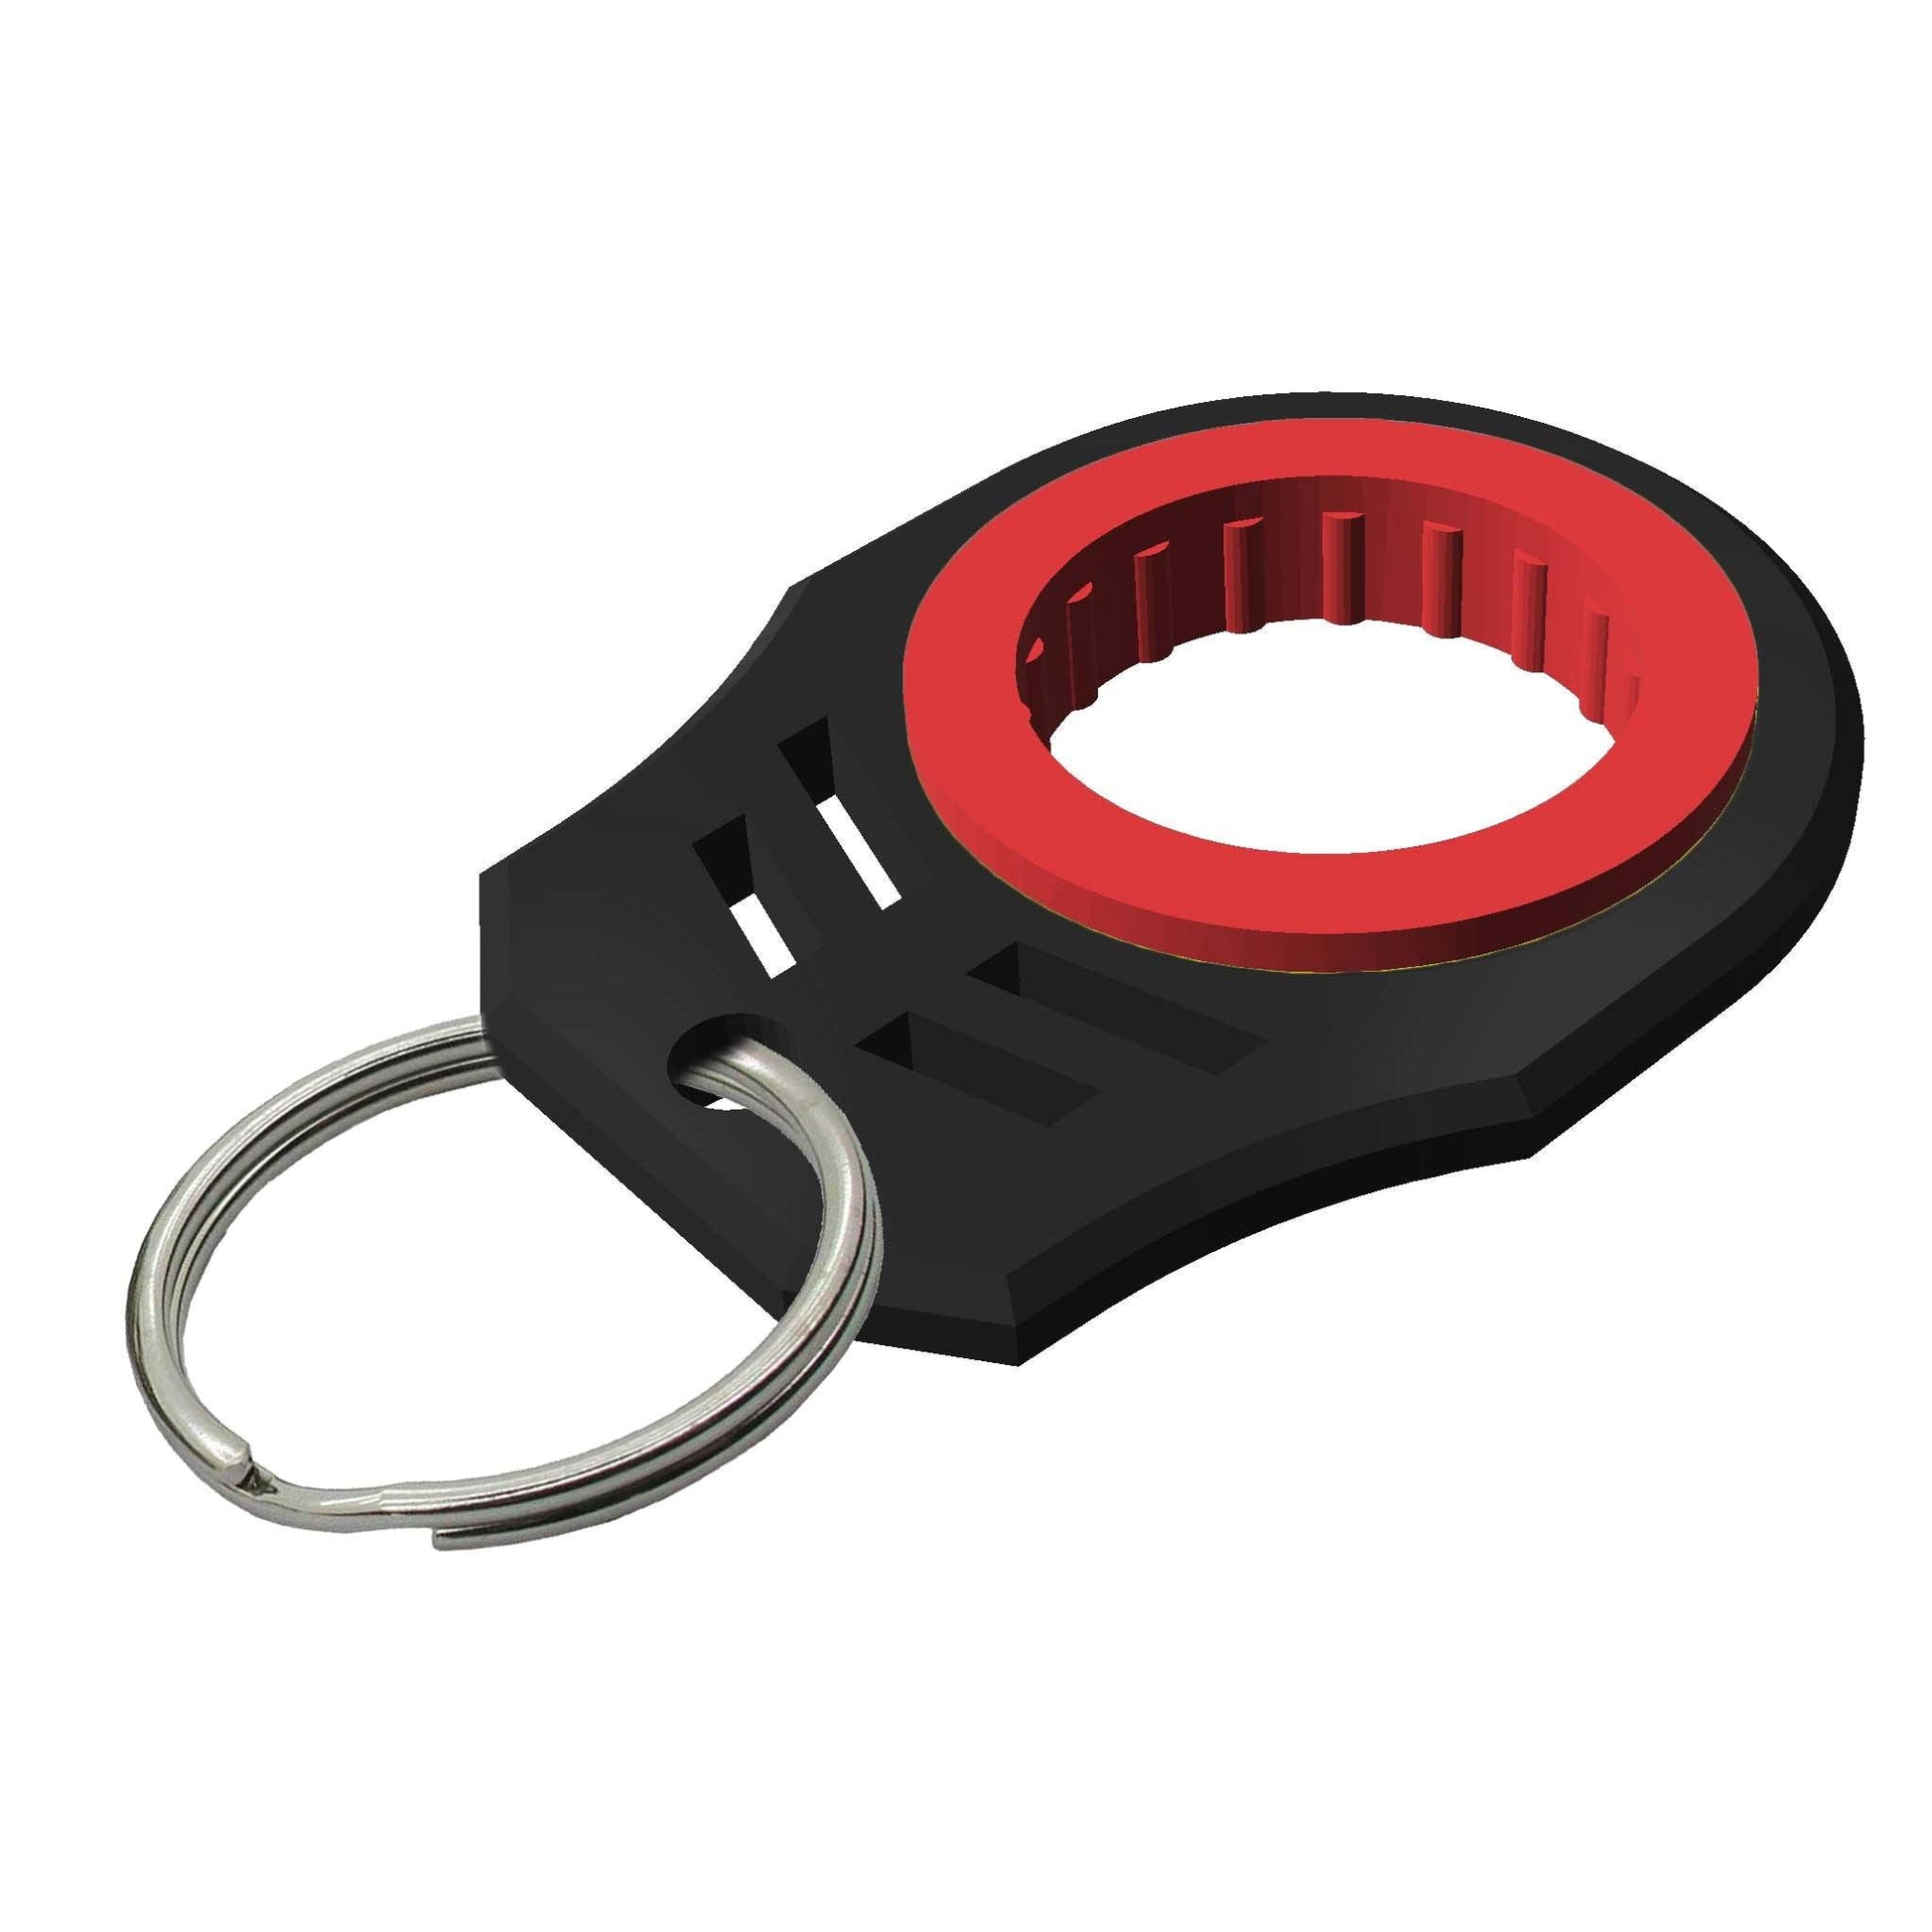 Spinner Key Chain with Finger-Spinning Feature